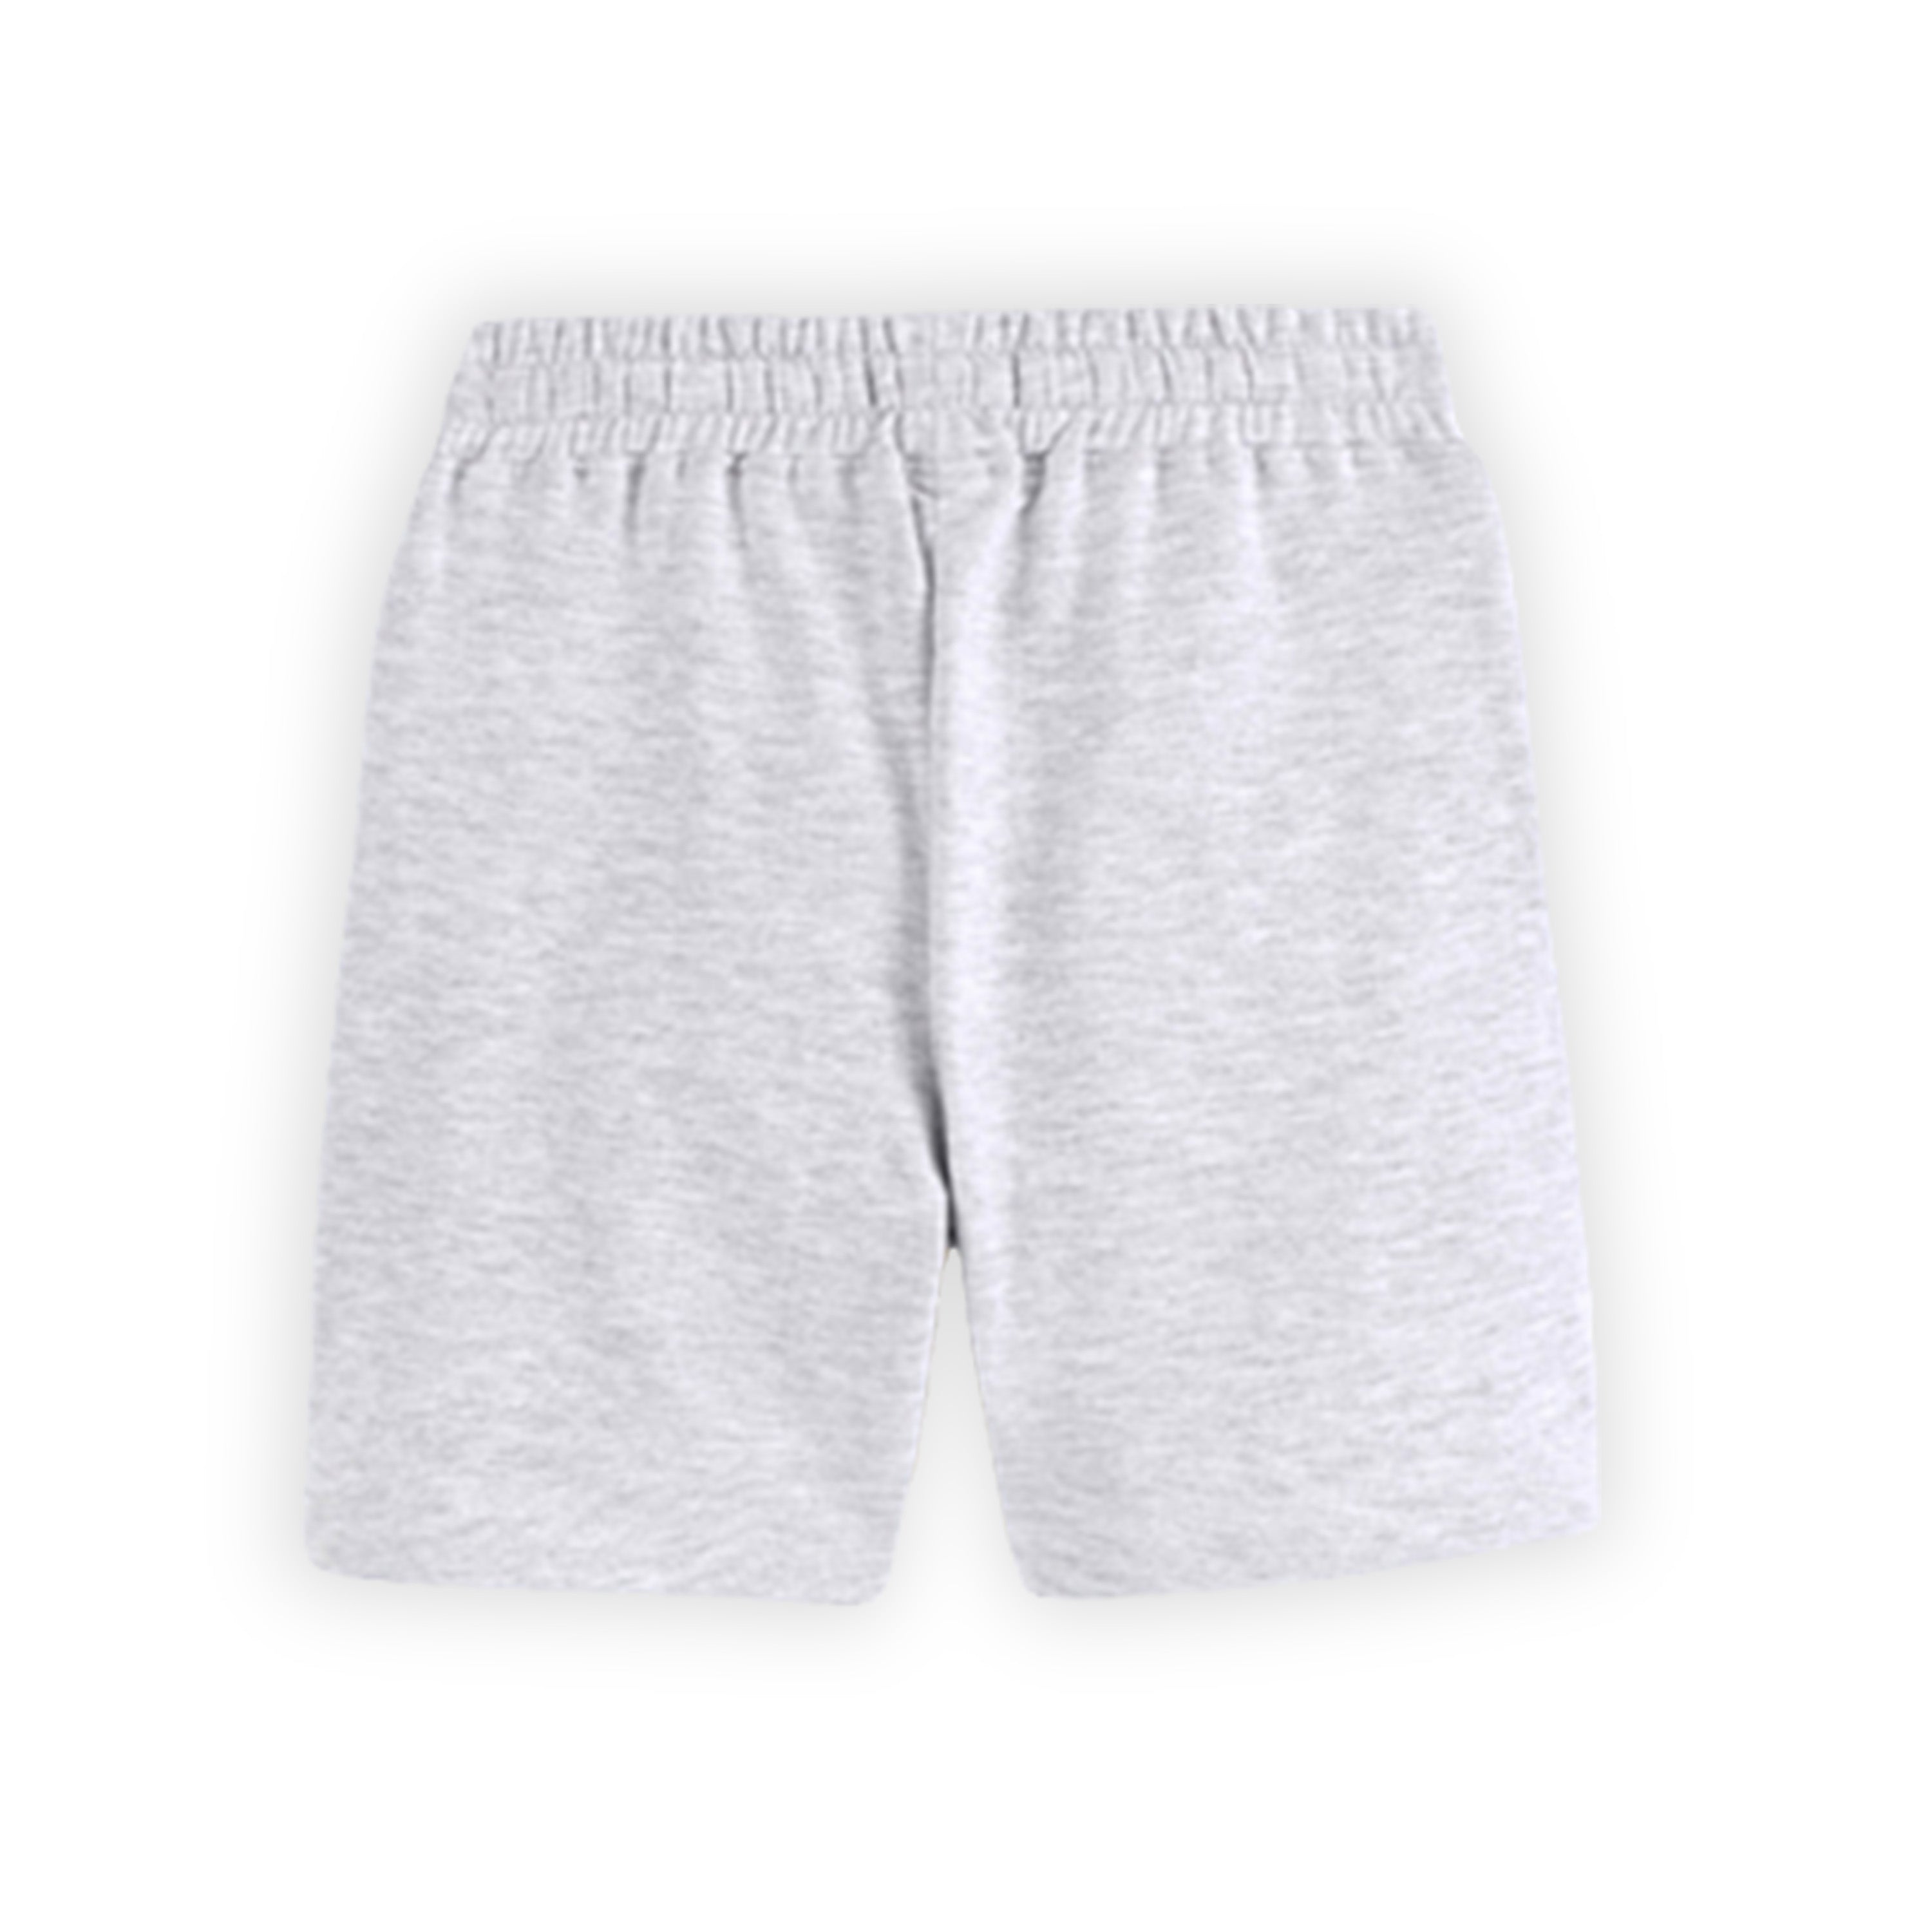 Kids Grey Solid Cotton Shorts